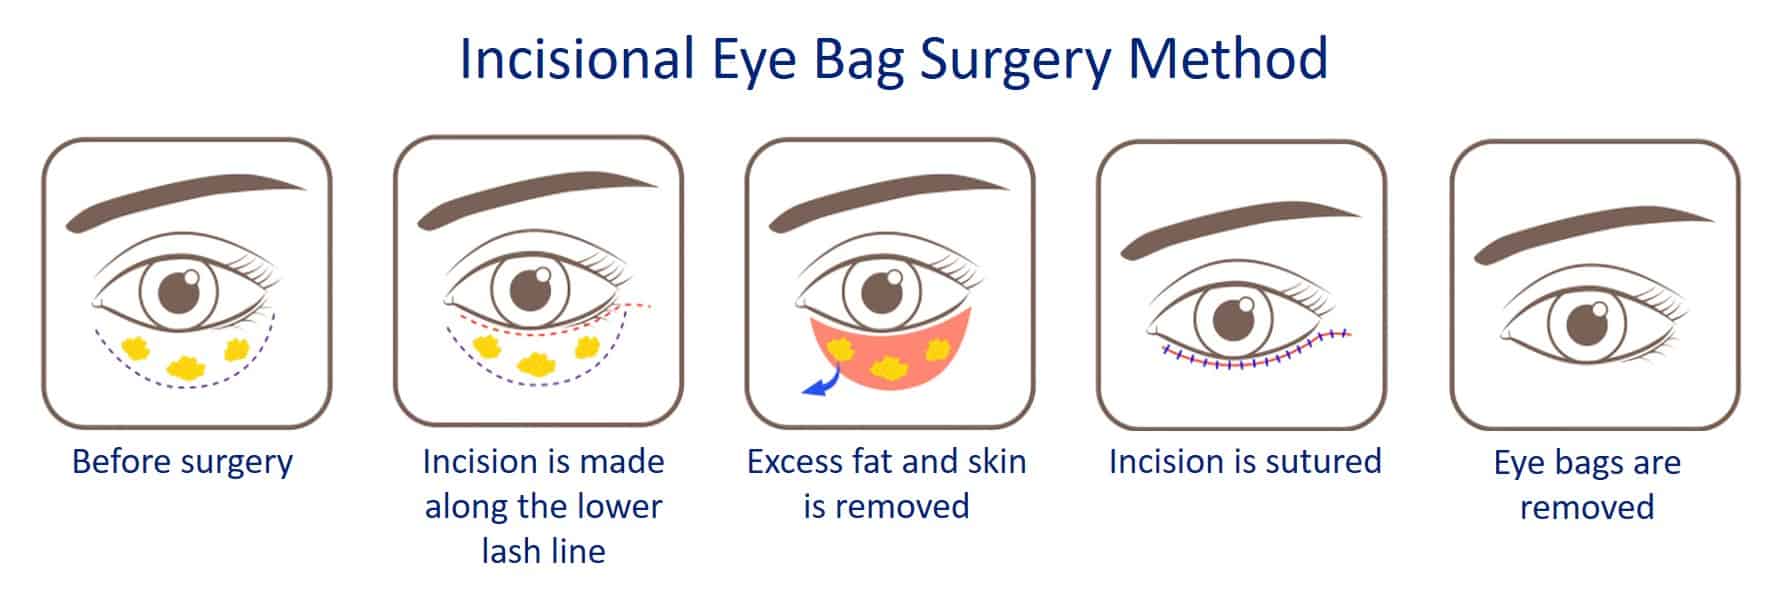 Incisional Eye Bag Removal Syrgery | Dream Plastic Surgery